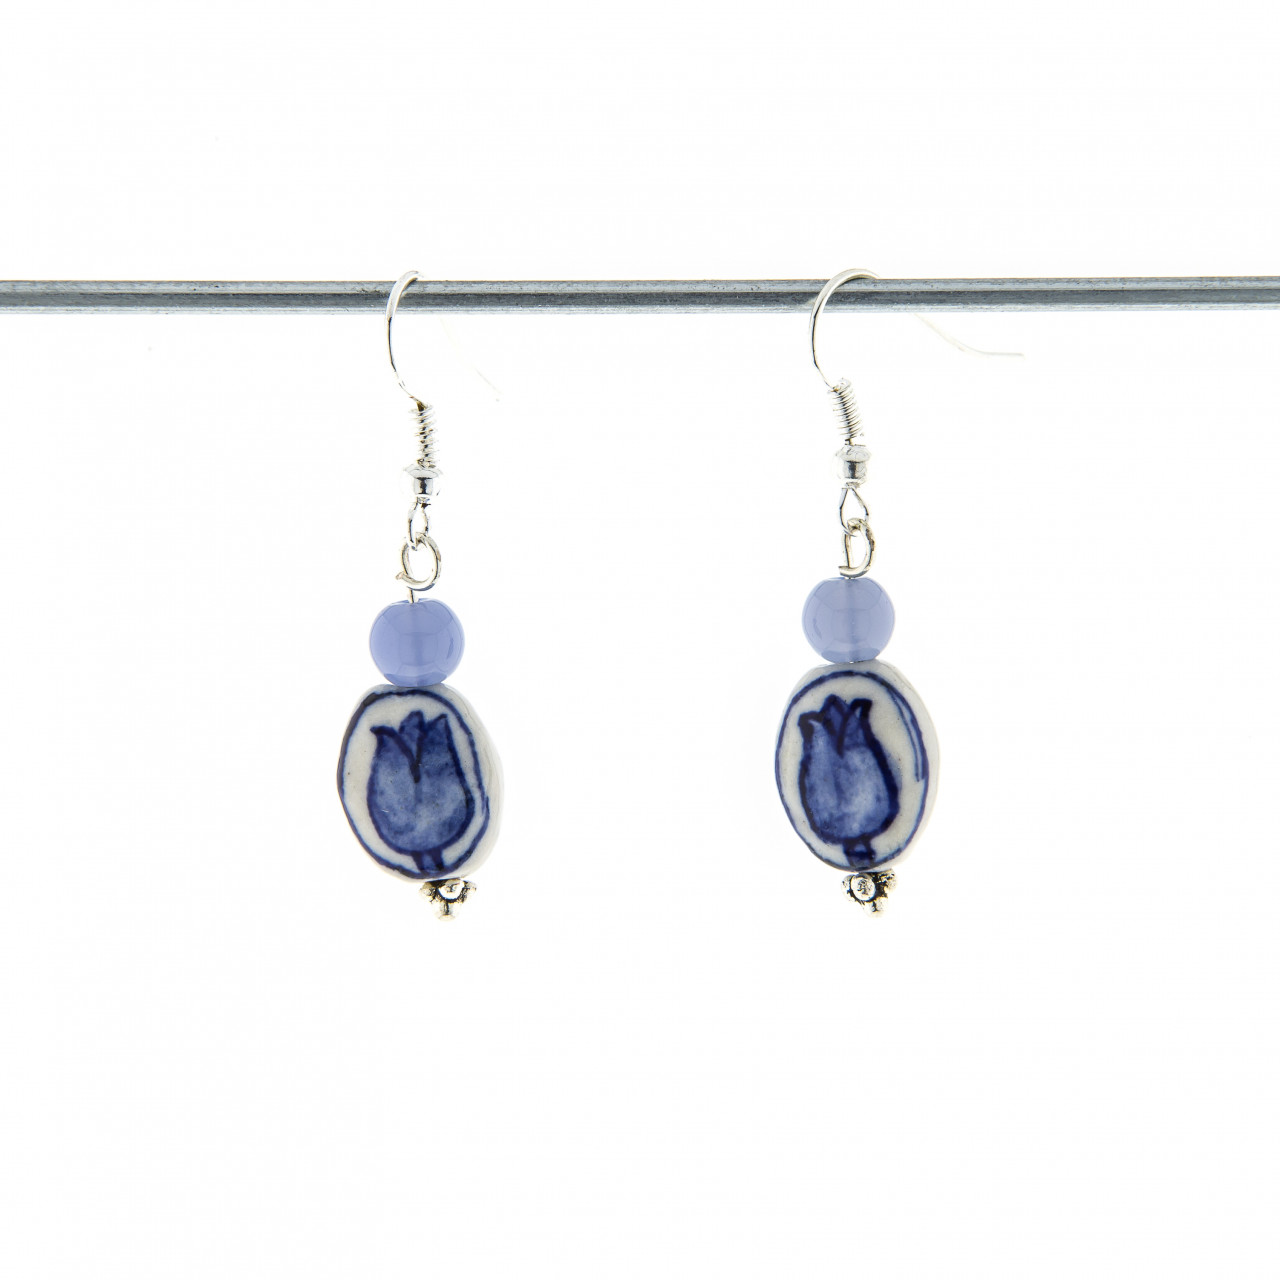 Bohemian earrings with hand-painted Delft blue beads